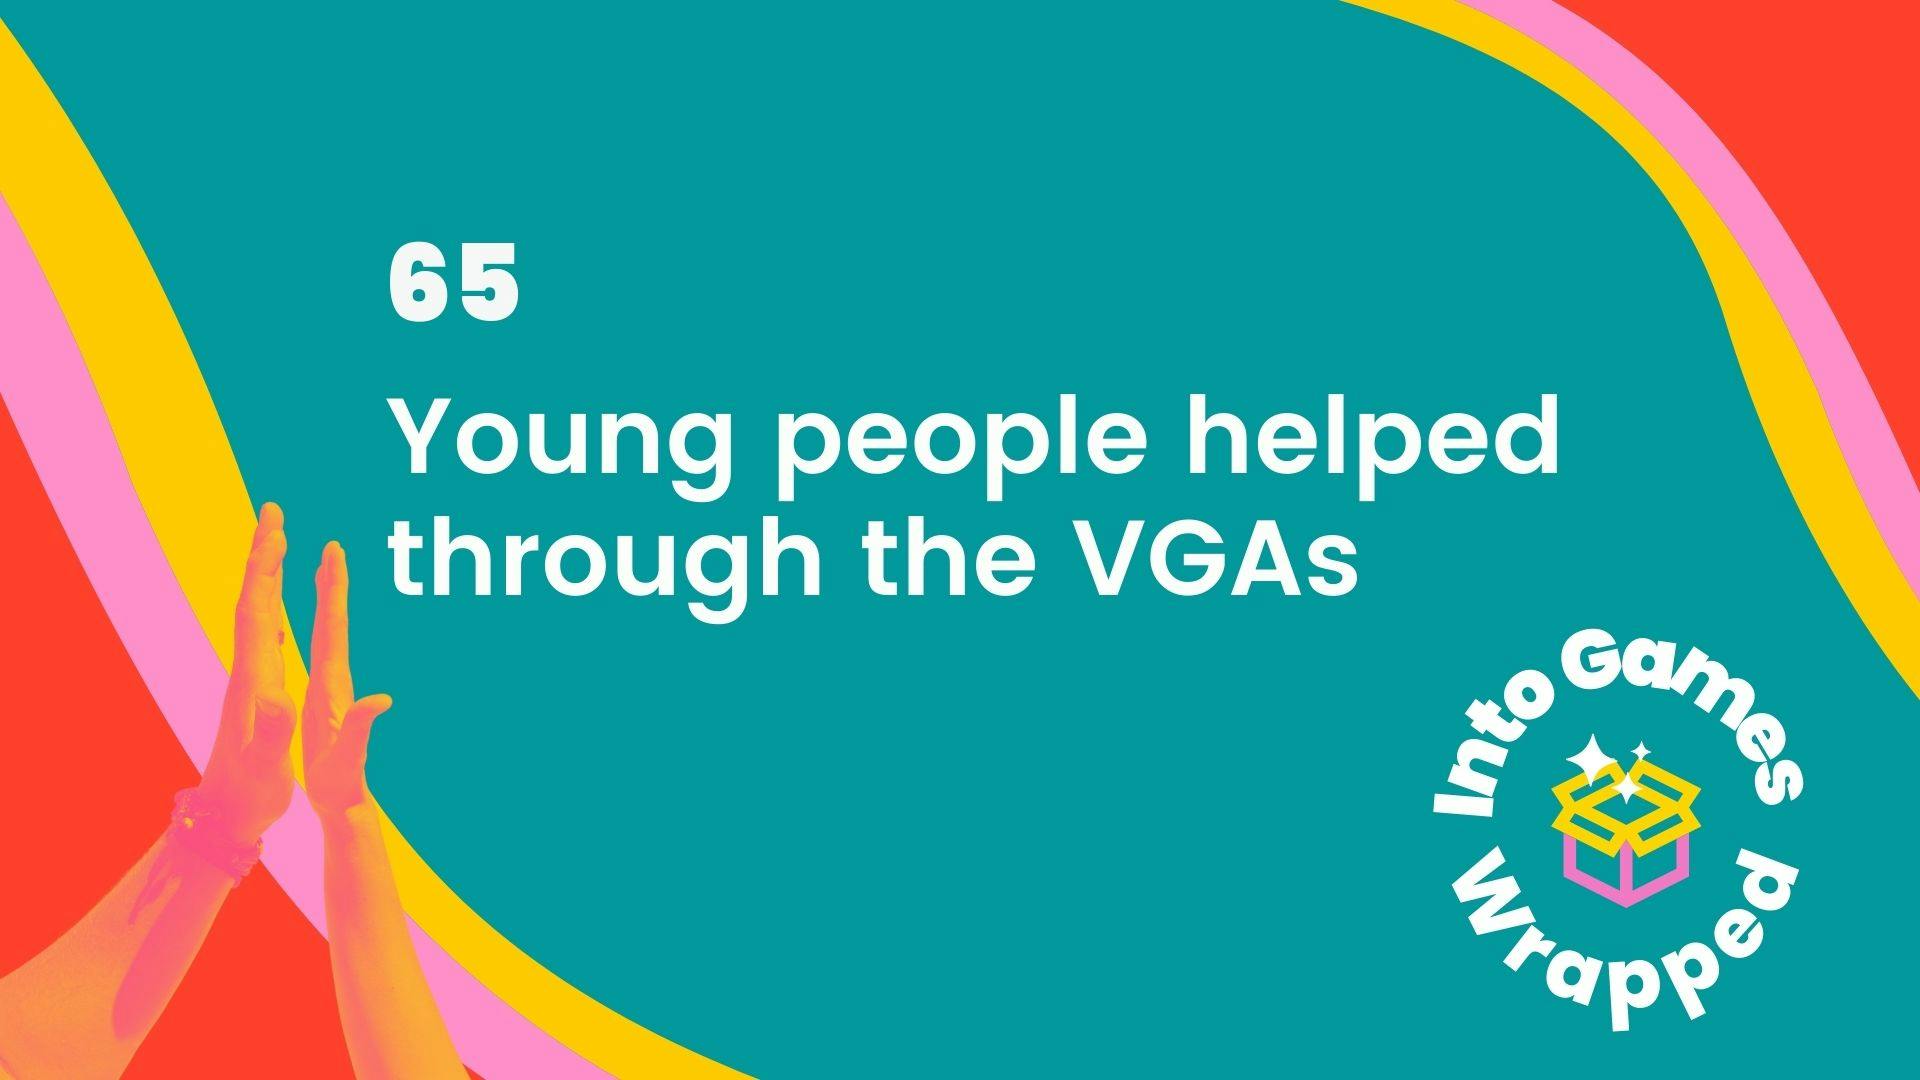 65 young people helped through video game ambassadors